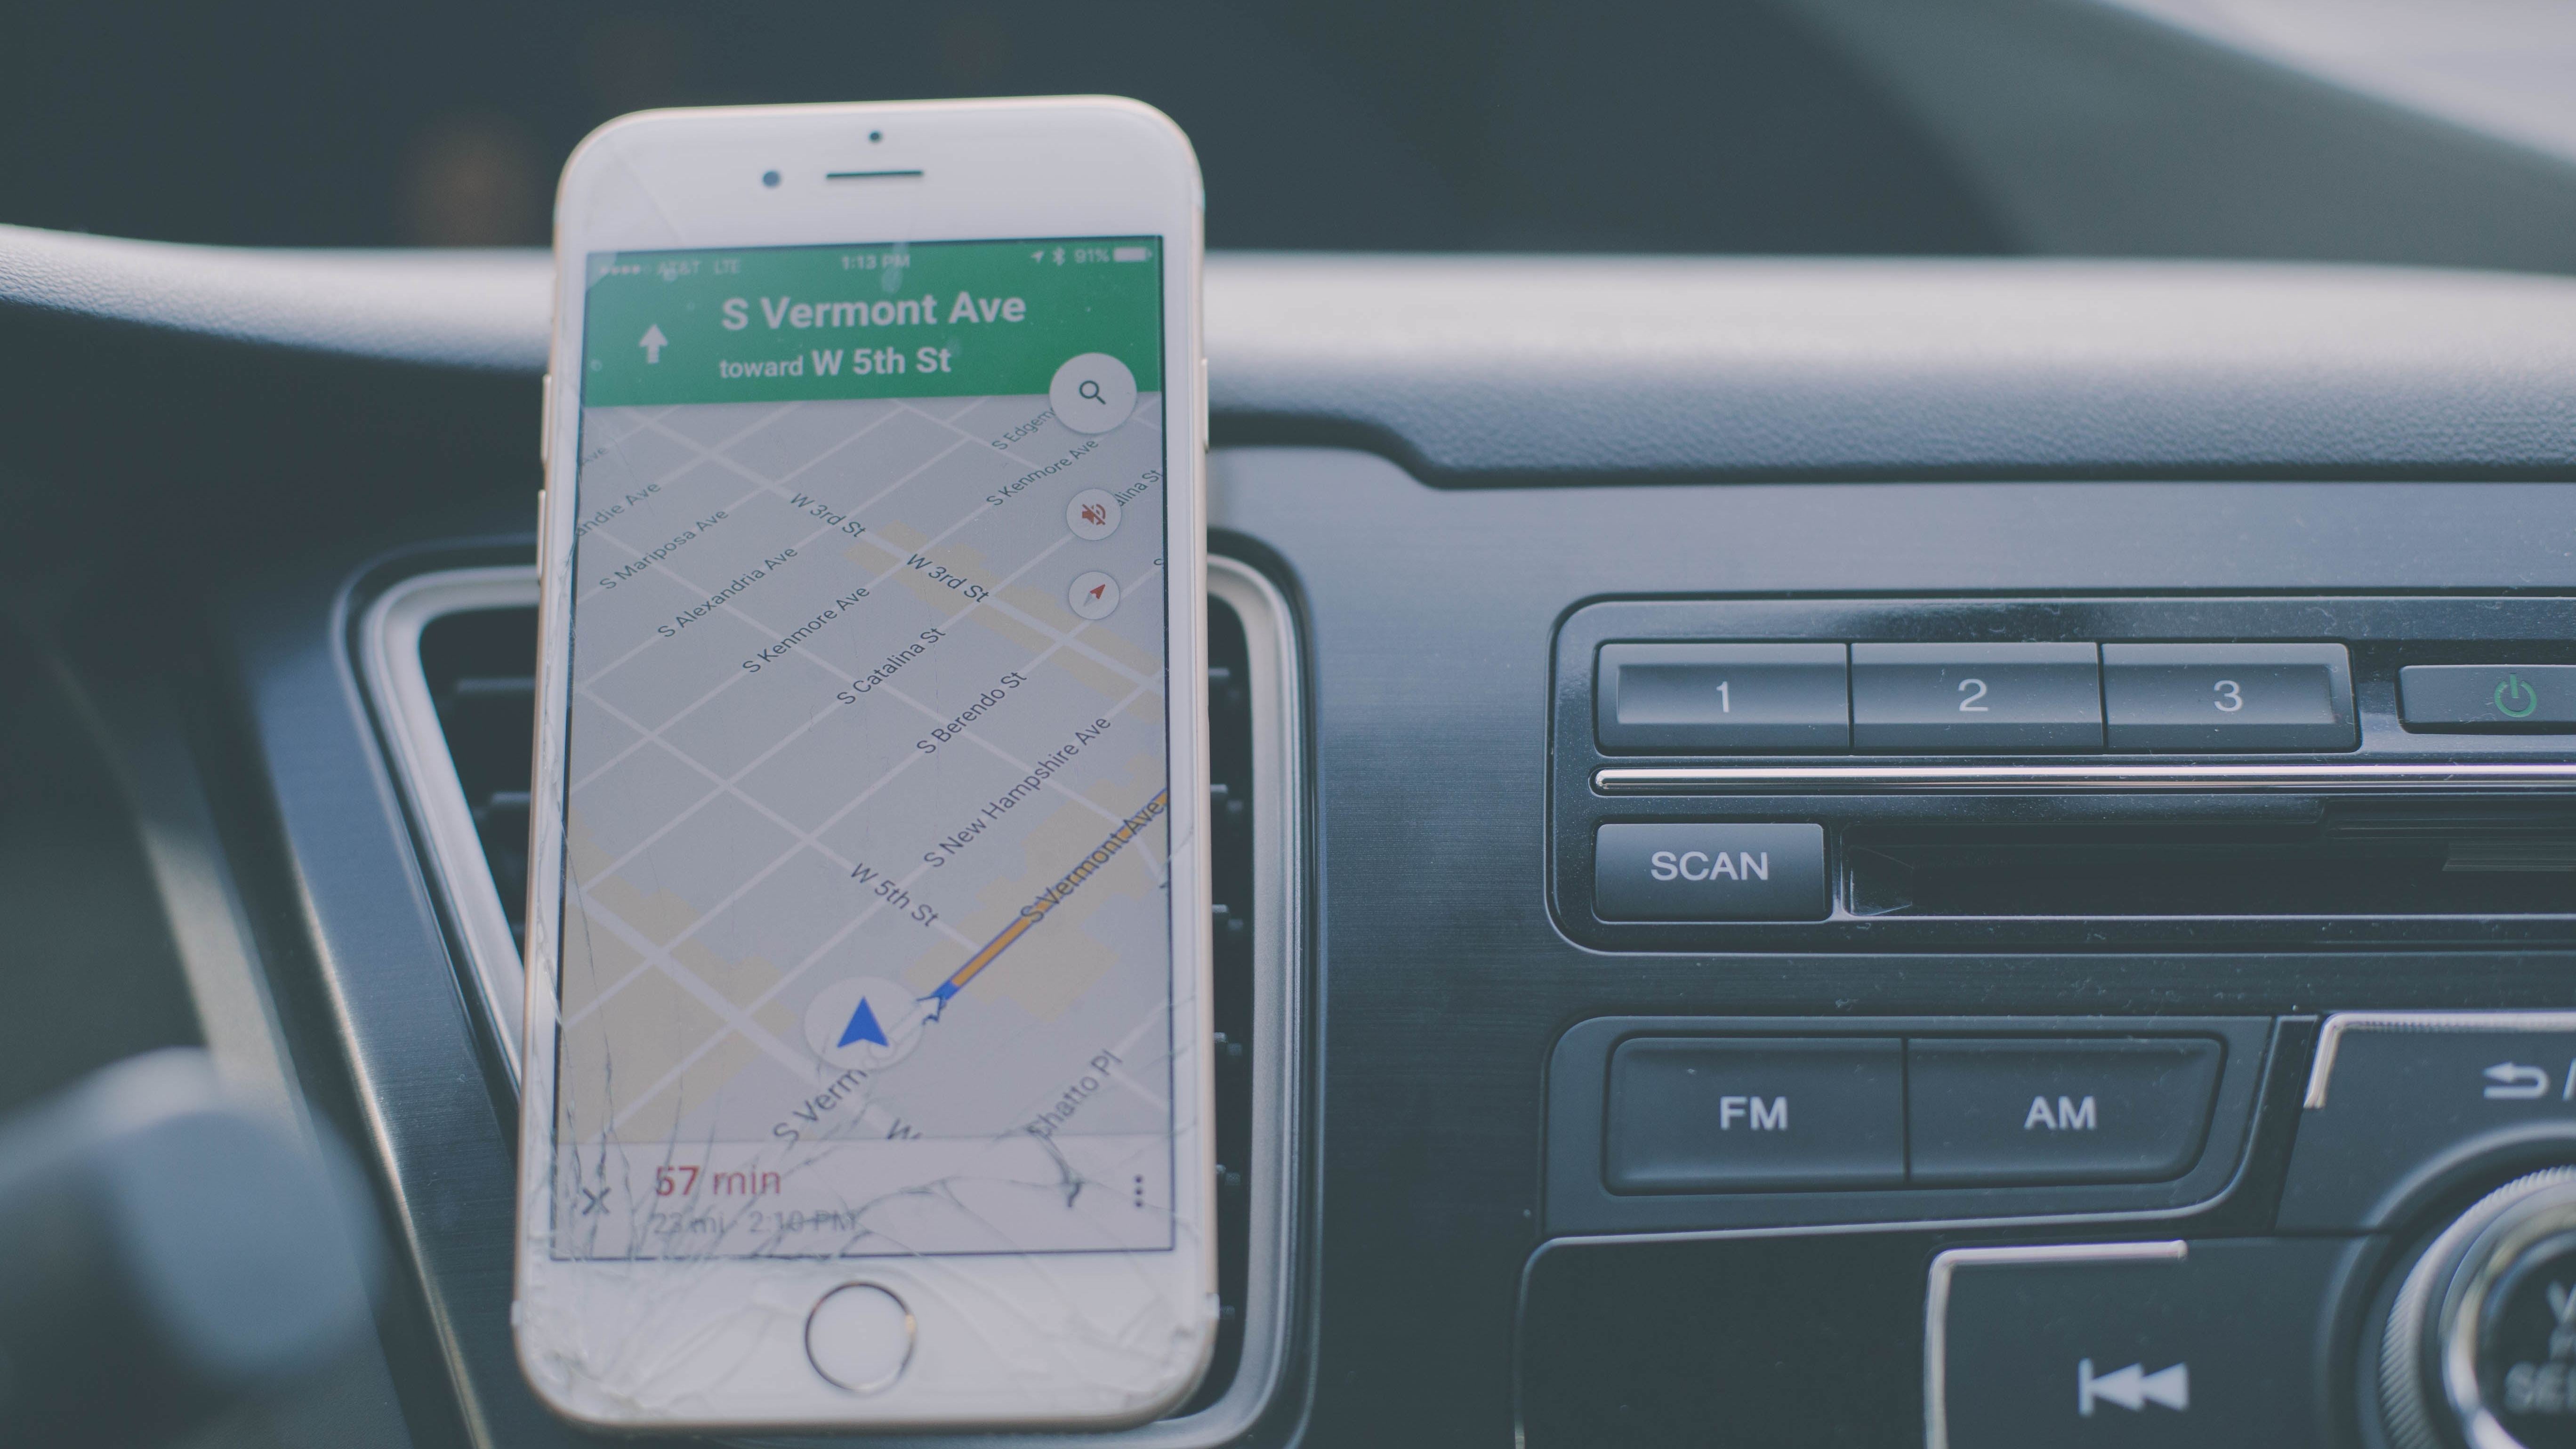 How To Switch Between Google Maps And Apple Maps In iOS